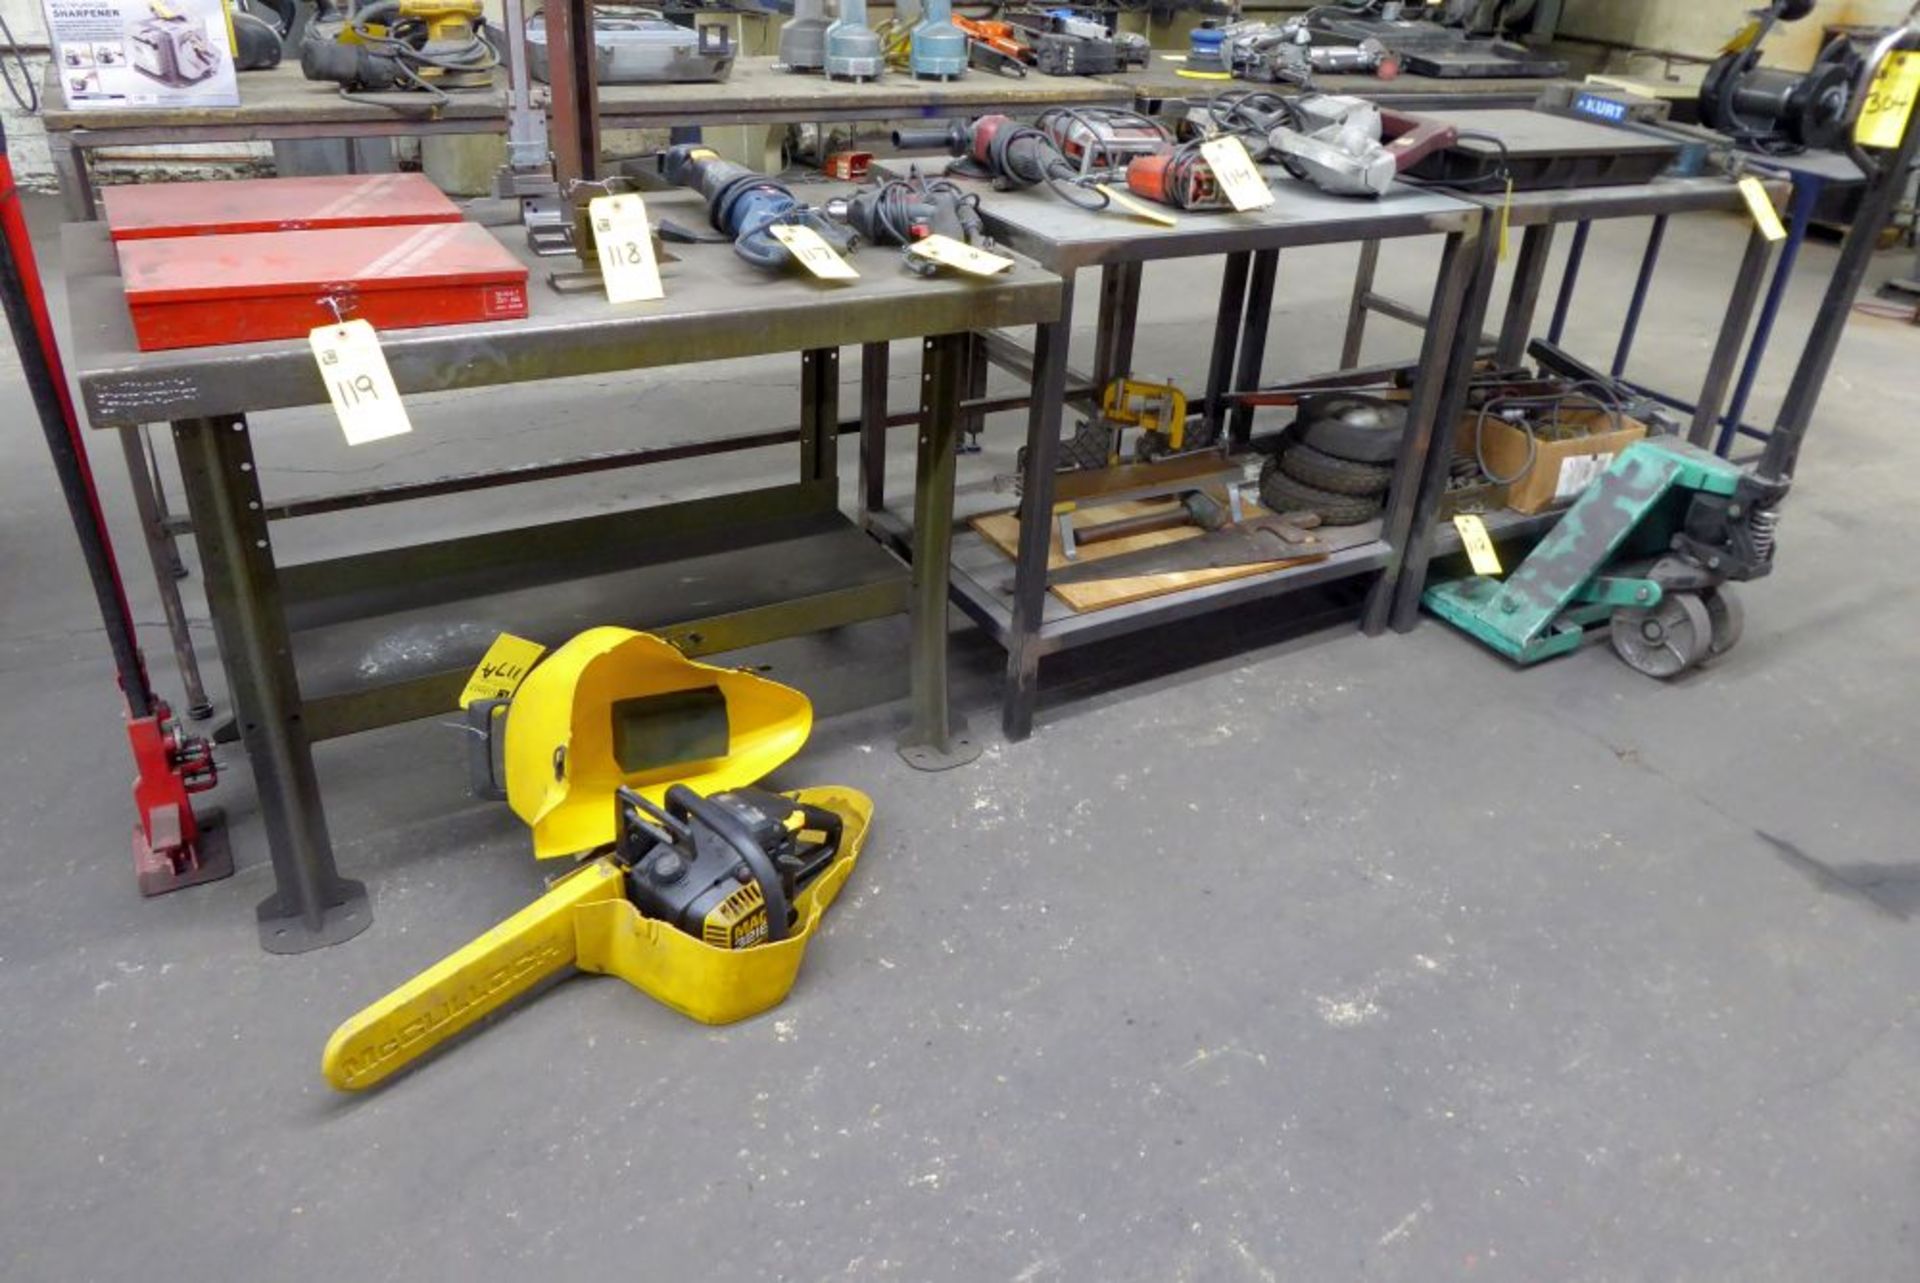 Miter Box, Saw, Grinder Parts, Wheels, Surface Plate, Work Tables, Etc. - Image 2 of 2